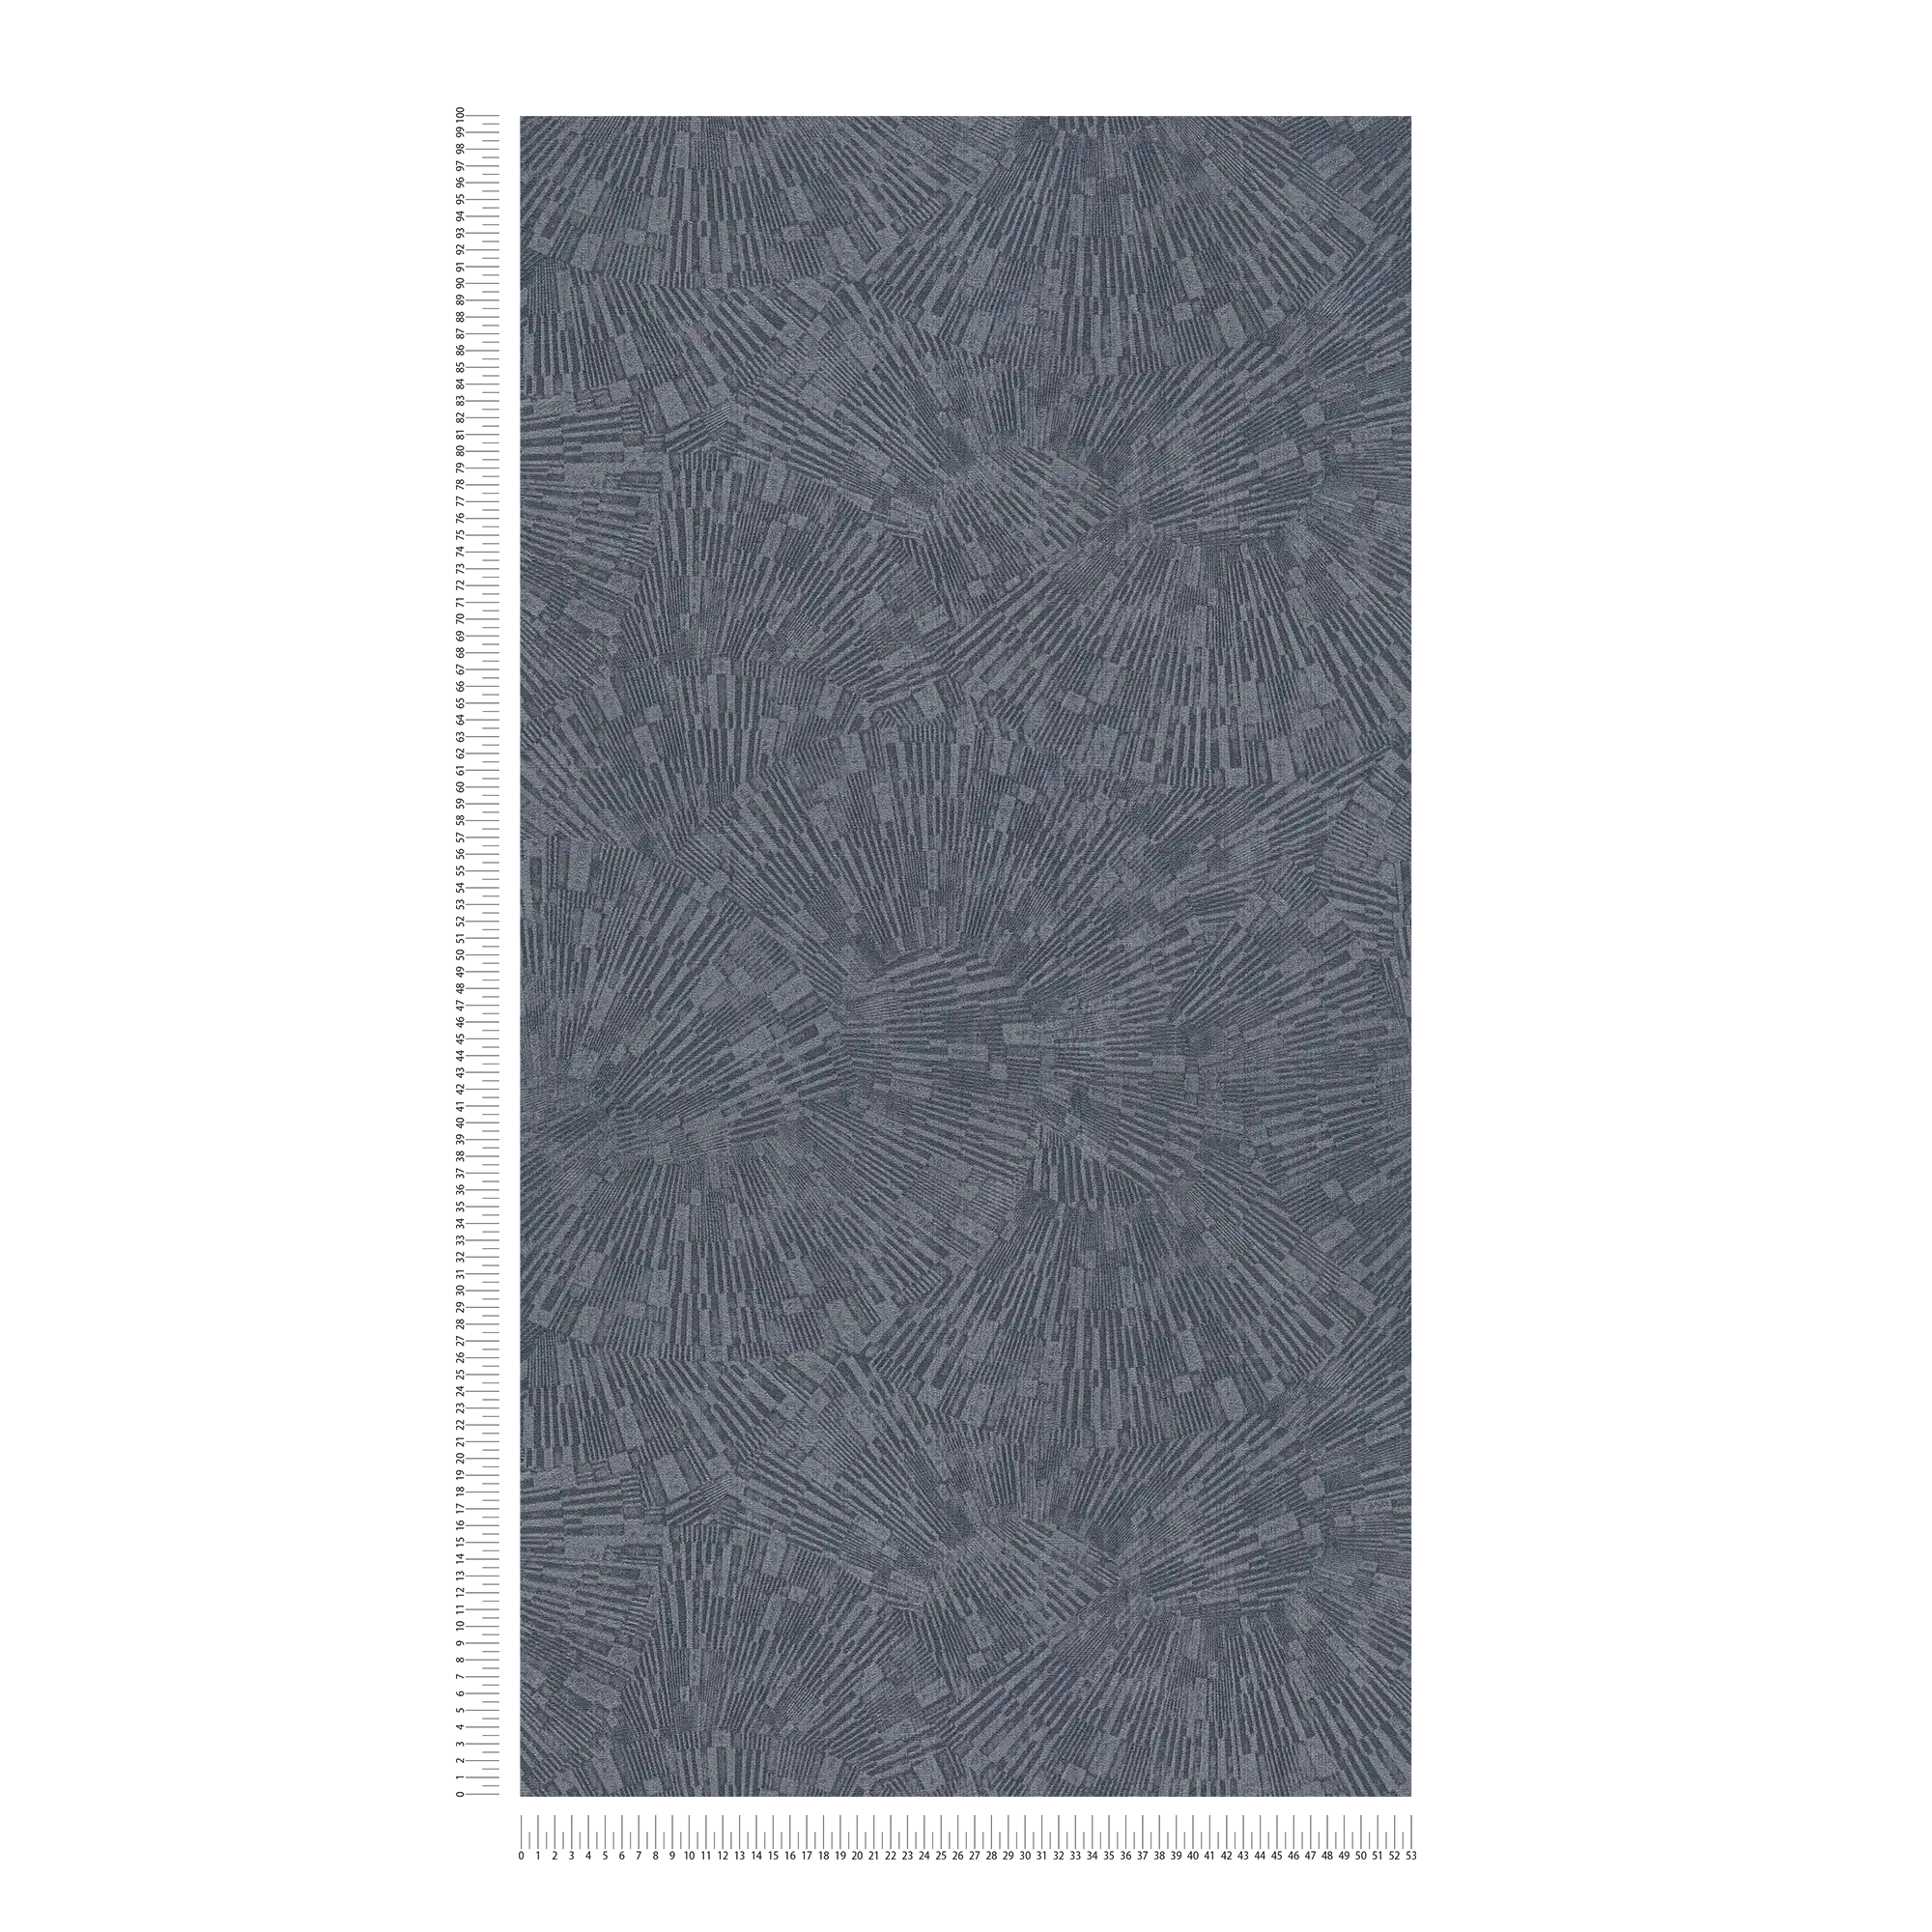             Plain wallpaper with graphic pattern & gloss effect - Blue
        